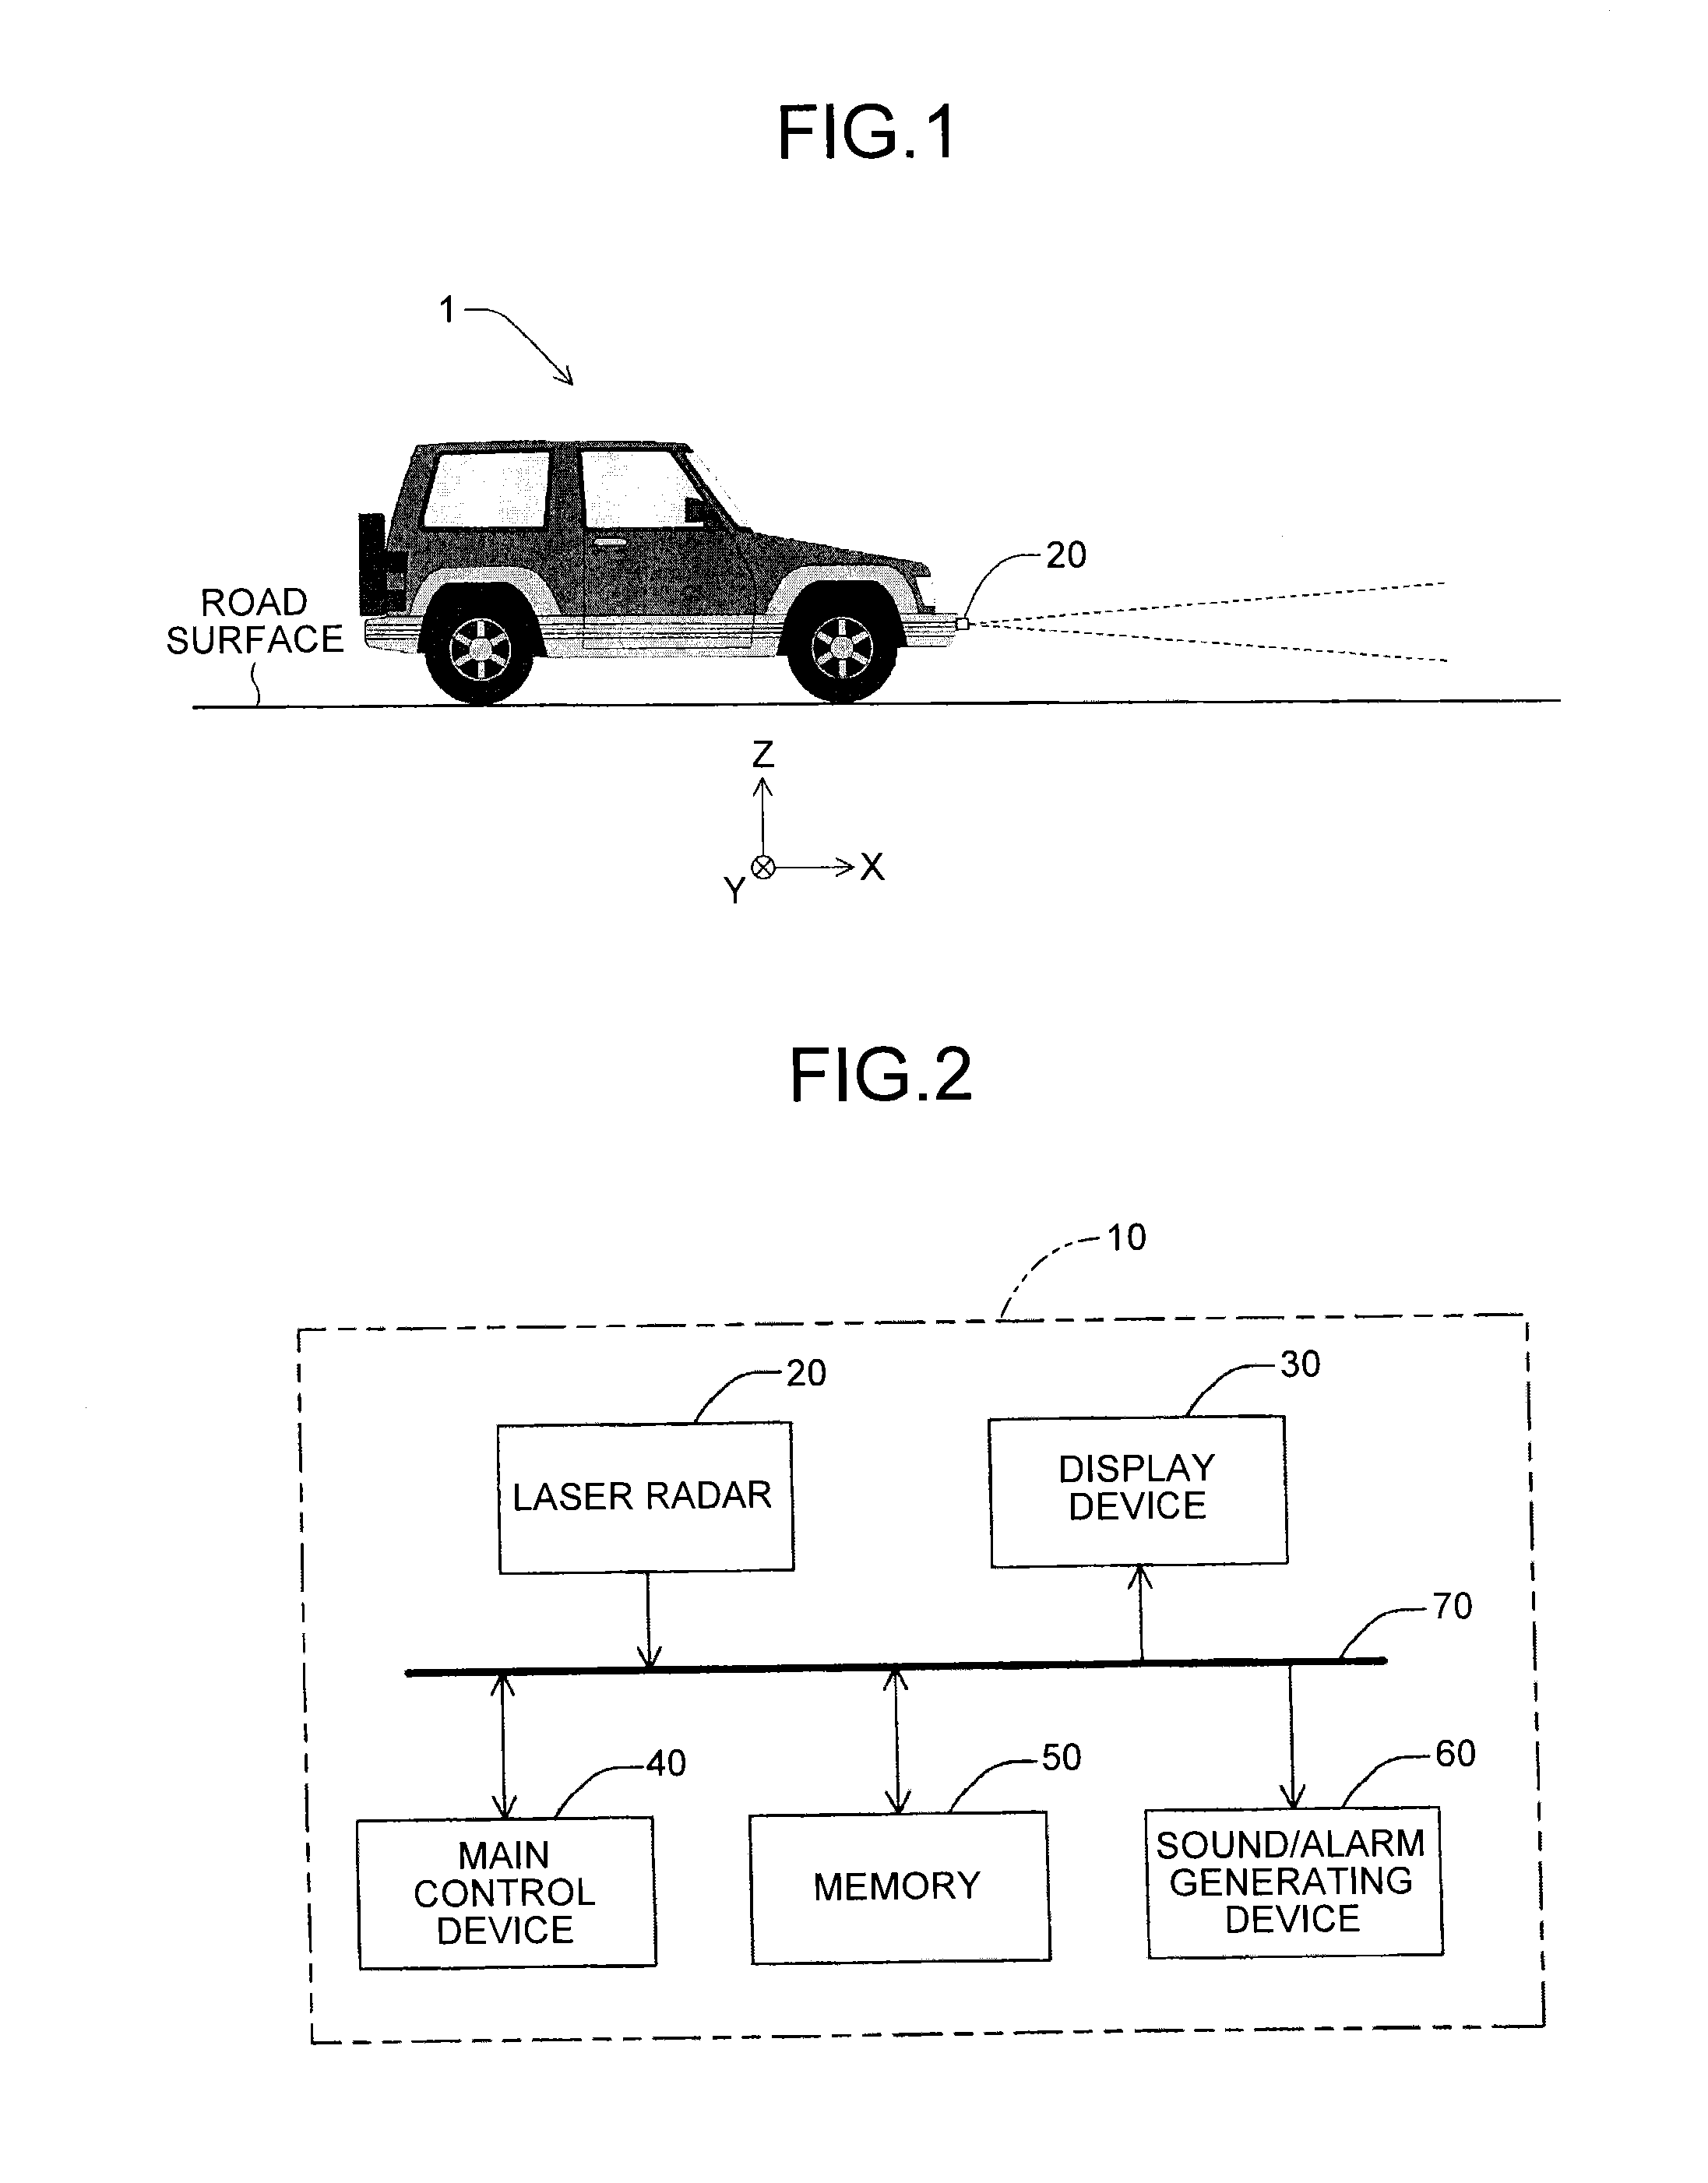 Object detection device and sensing apparatus